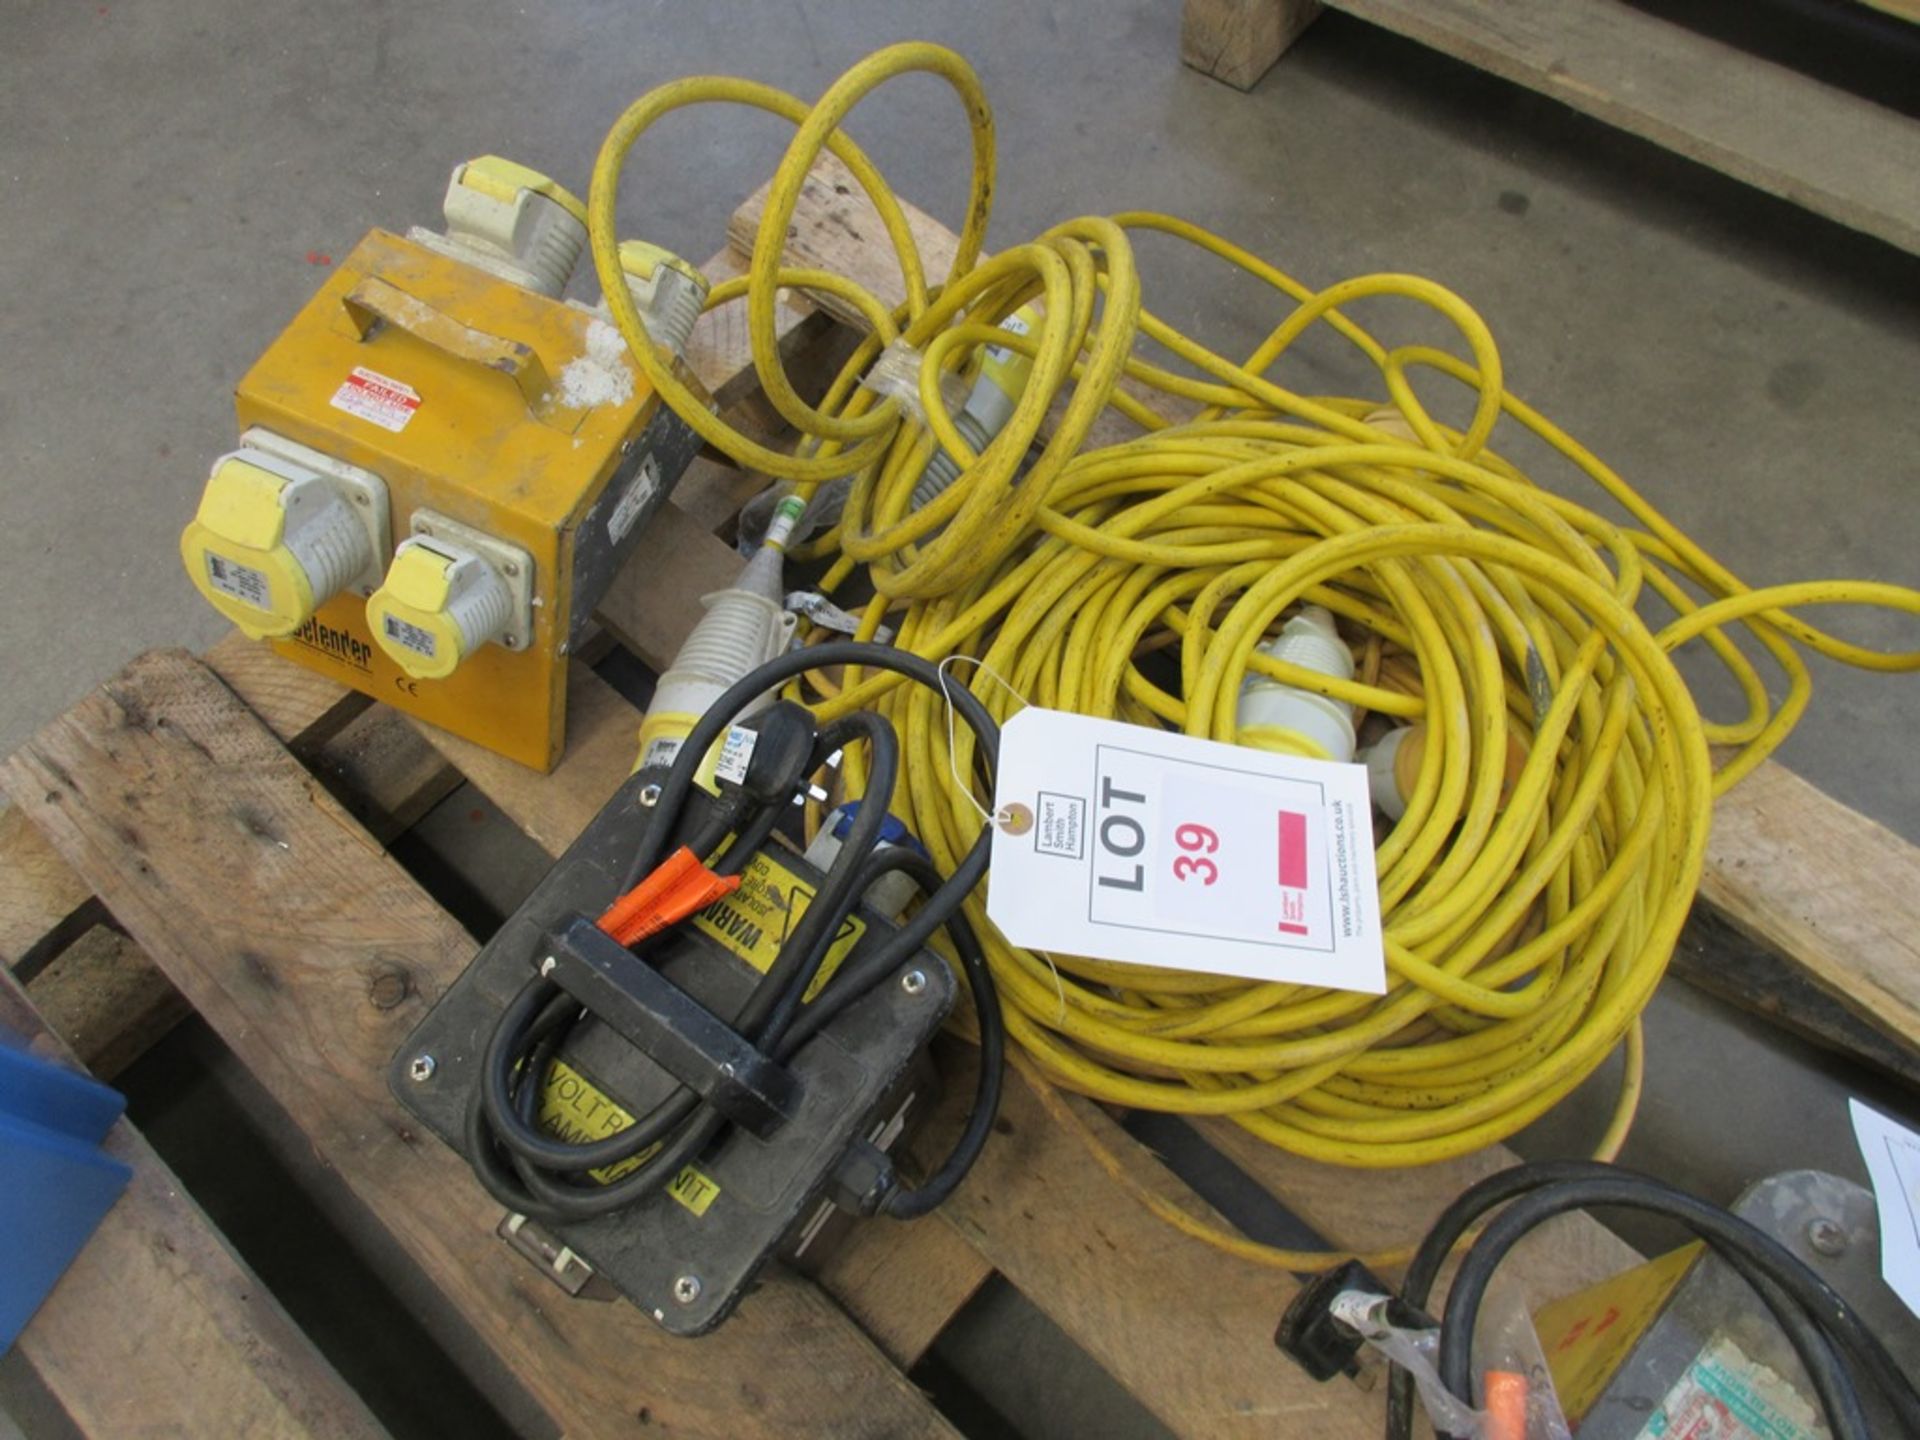 Assortment of 110v extension leads